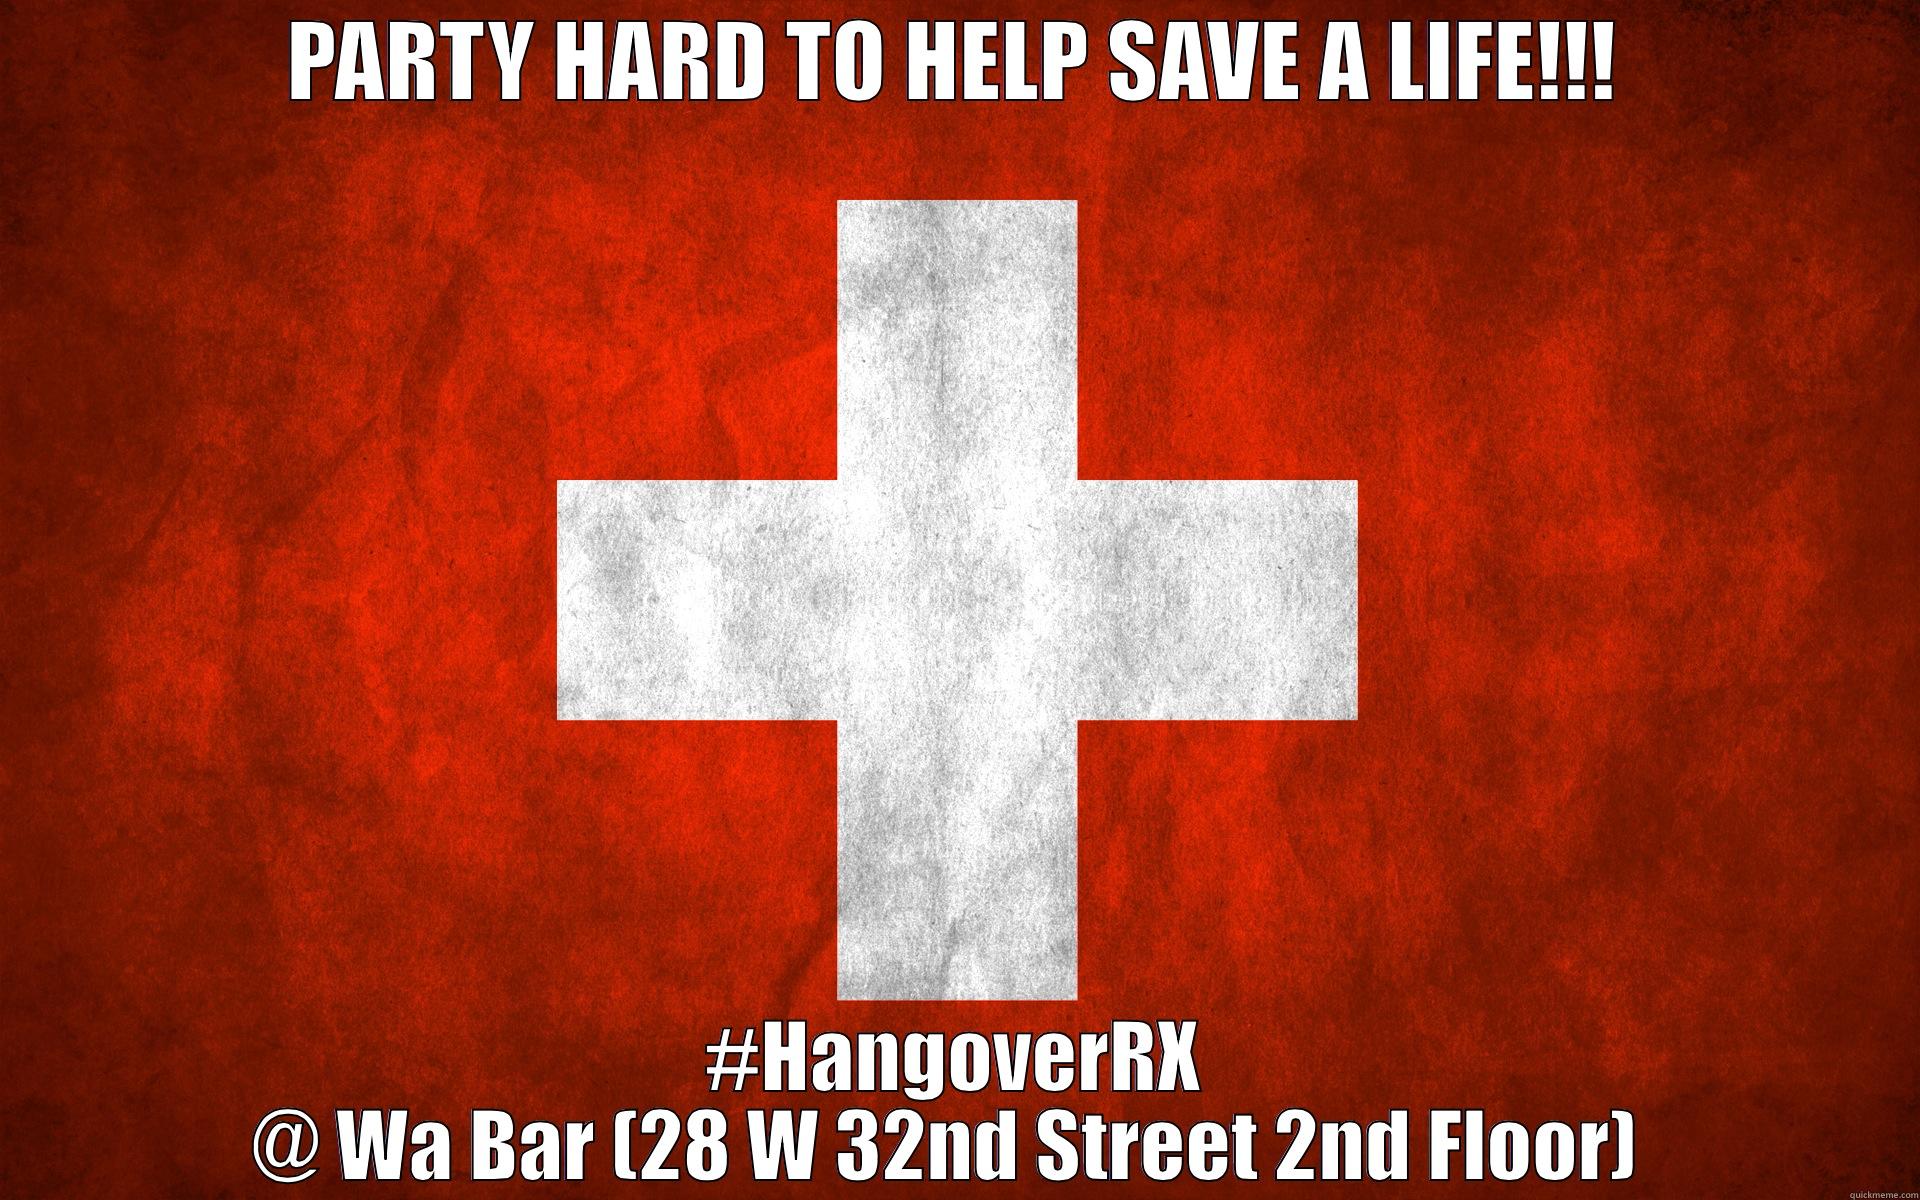 HANGOVER RX - PARTY HARD TO HELP SAVE A LIFE!!! #HANGOVERRX @ WA BAR (28 W 32ND STREET 2ND FLOOR)  Misc